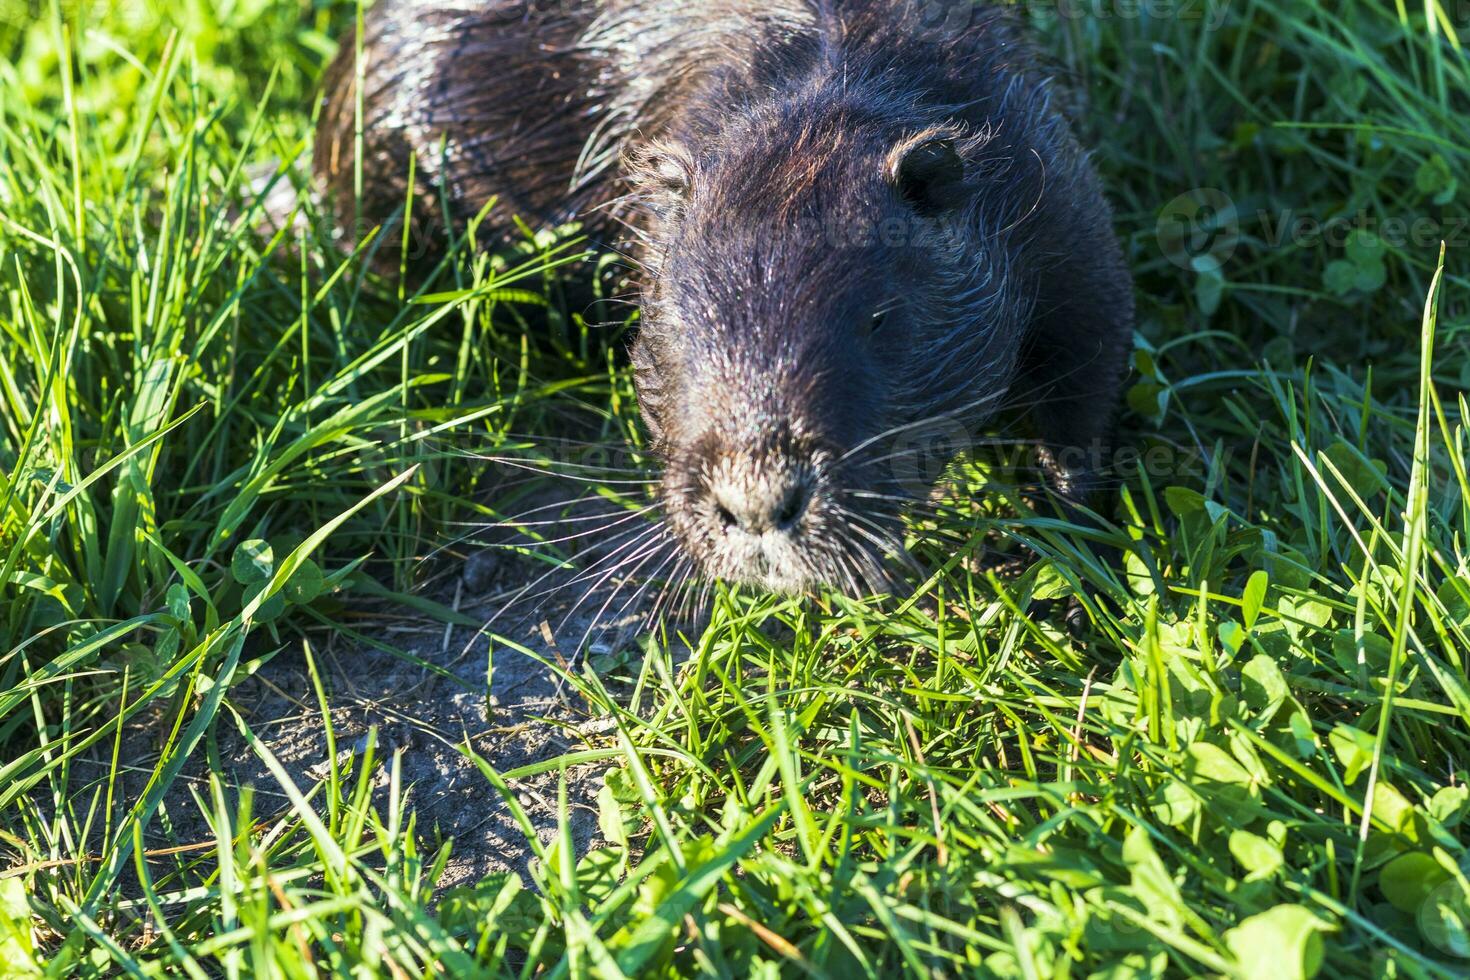 Shot of the muskrat by the bank of the river. Animal photo